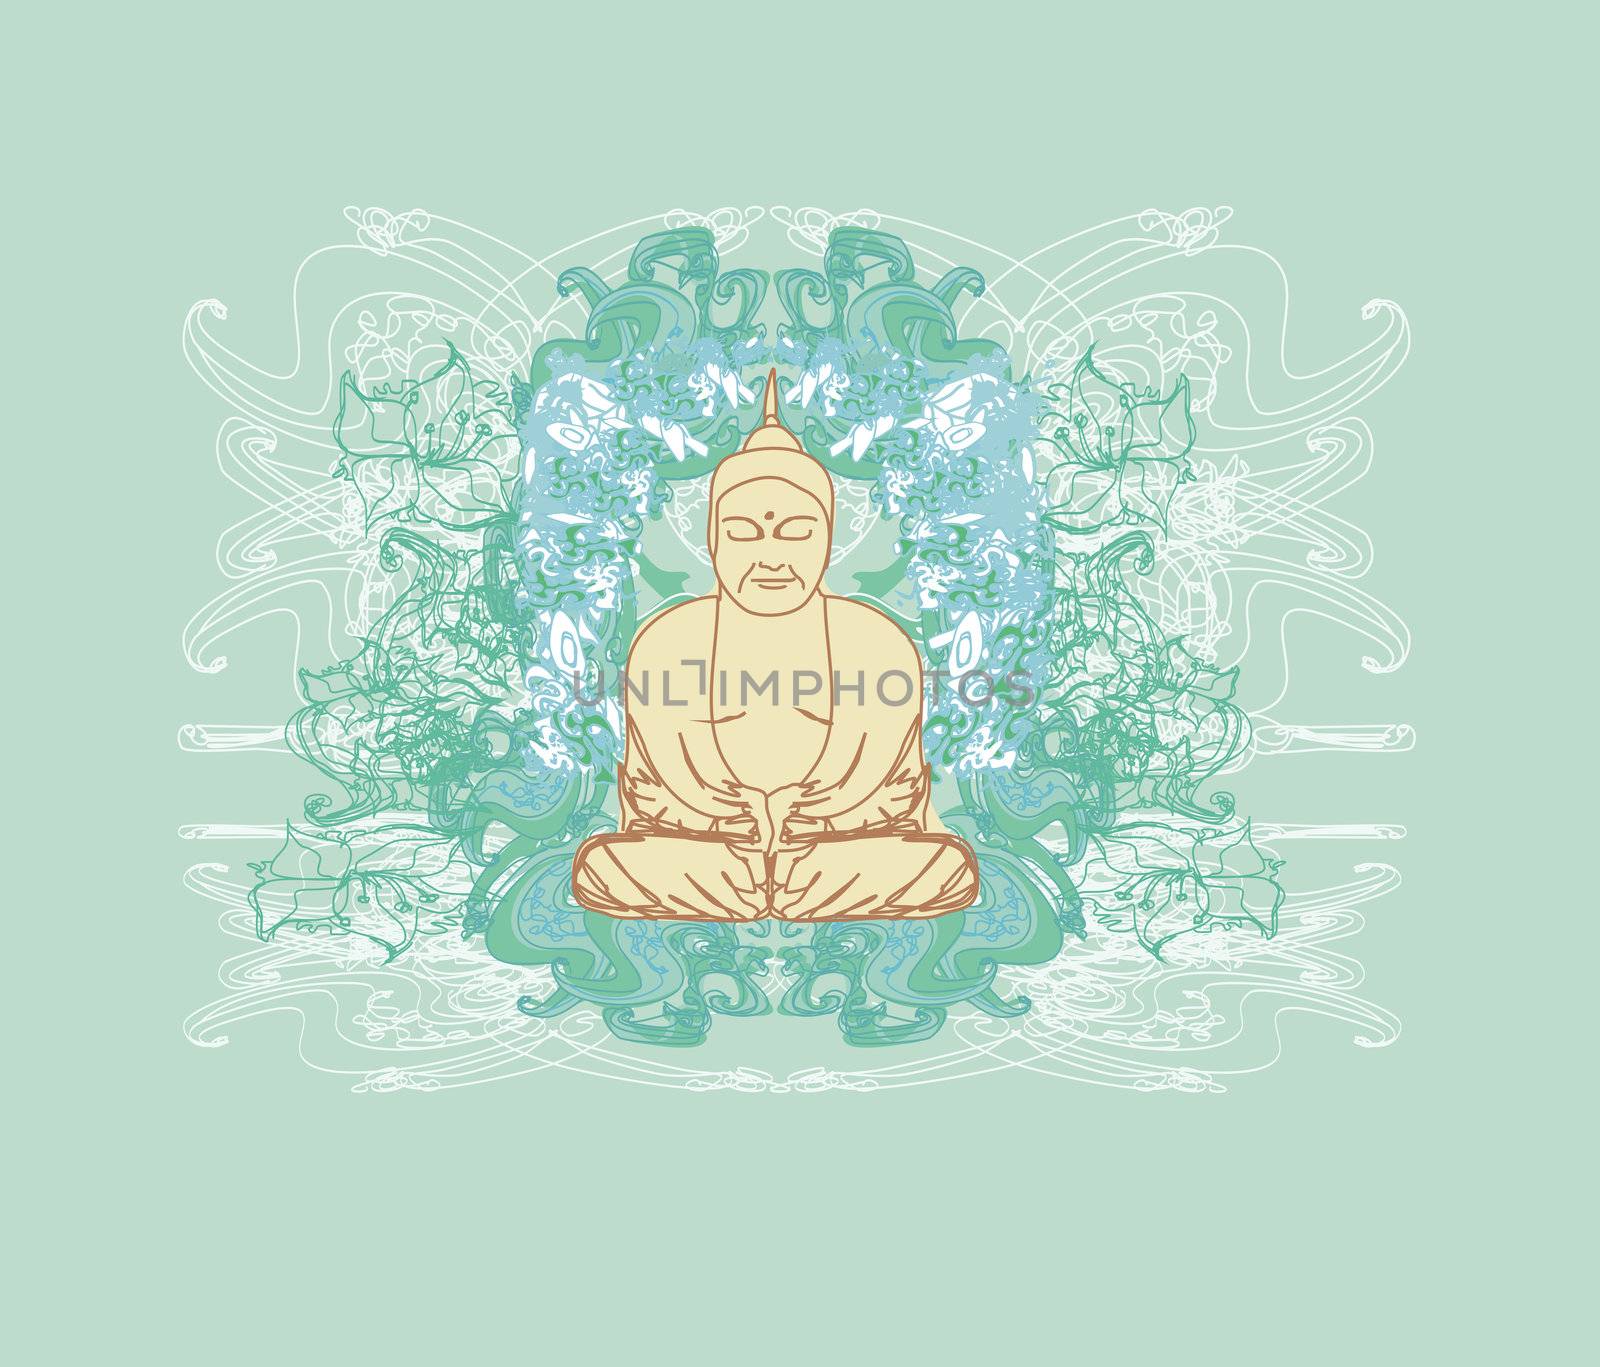 Vector of Chinese Traditional Artistic Buddhism Pattern